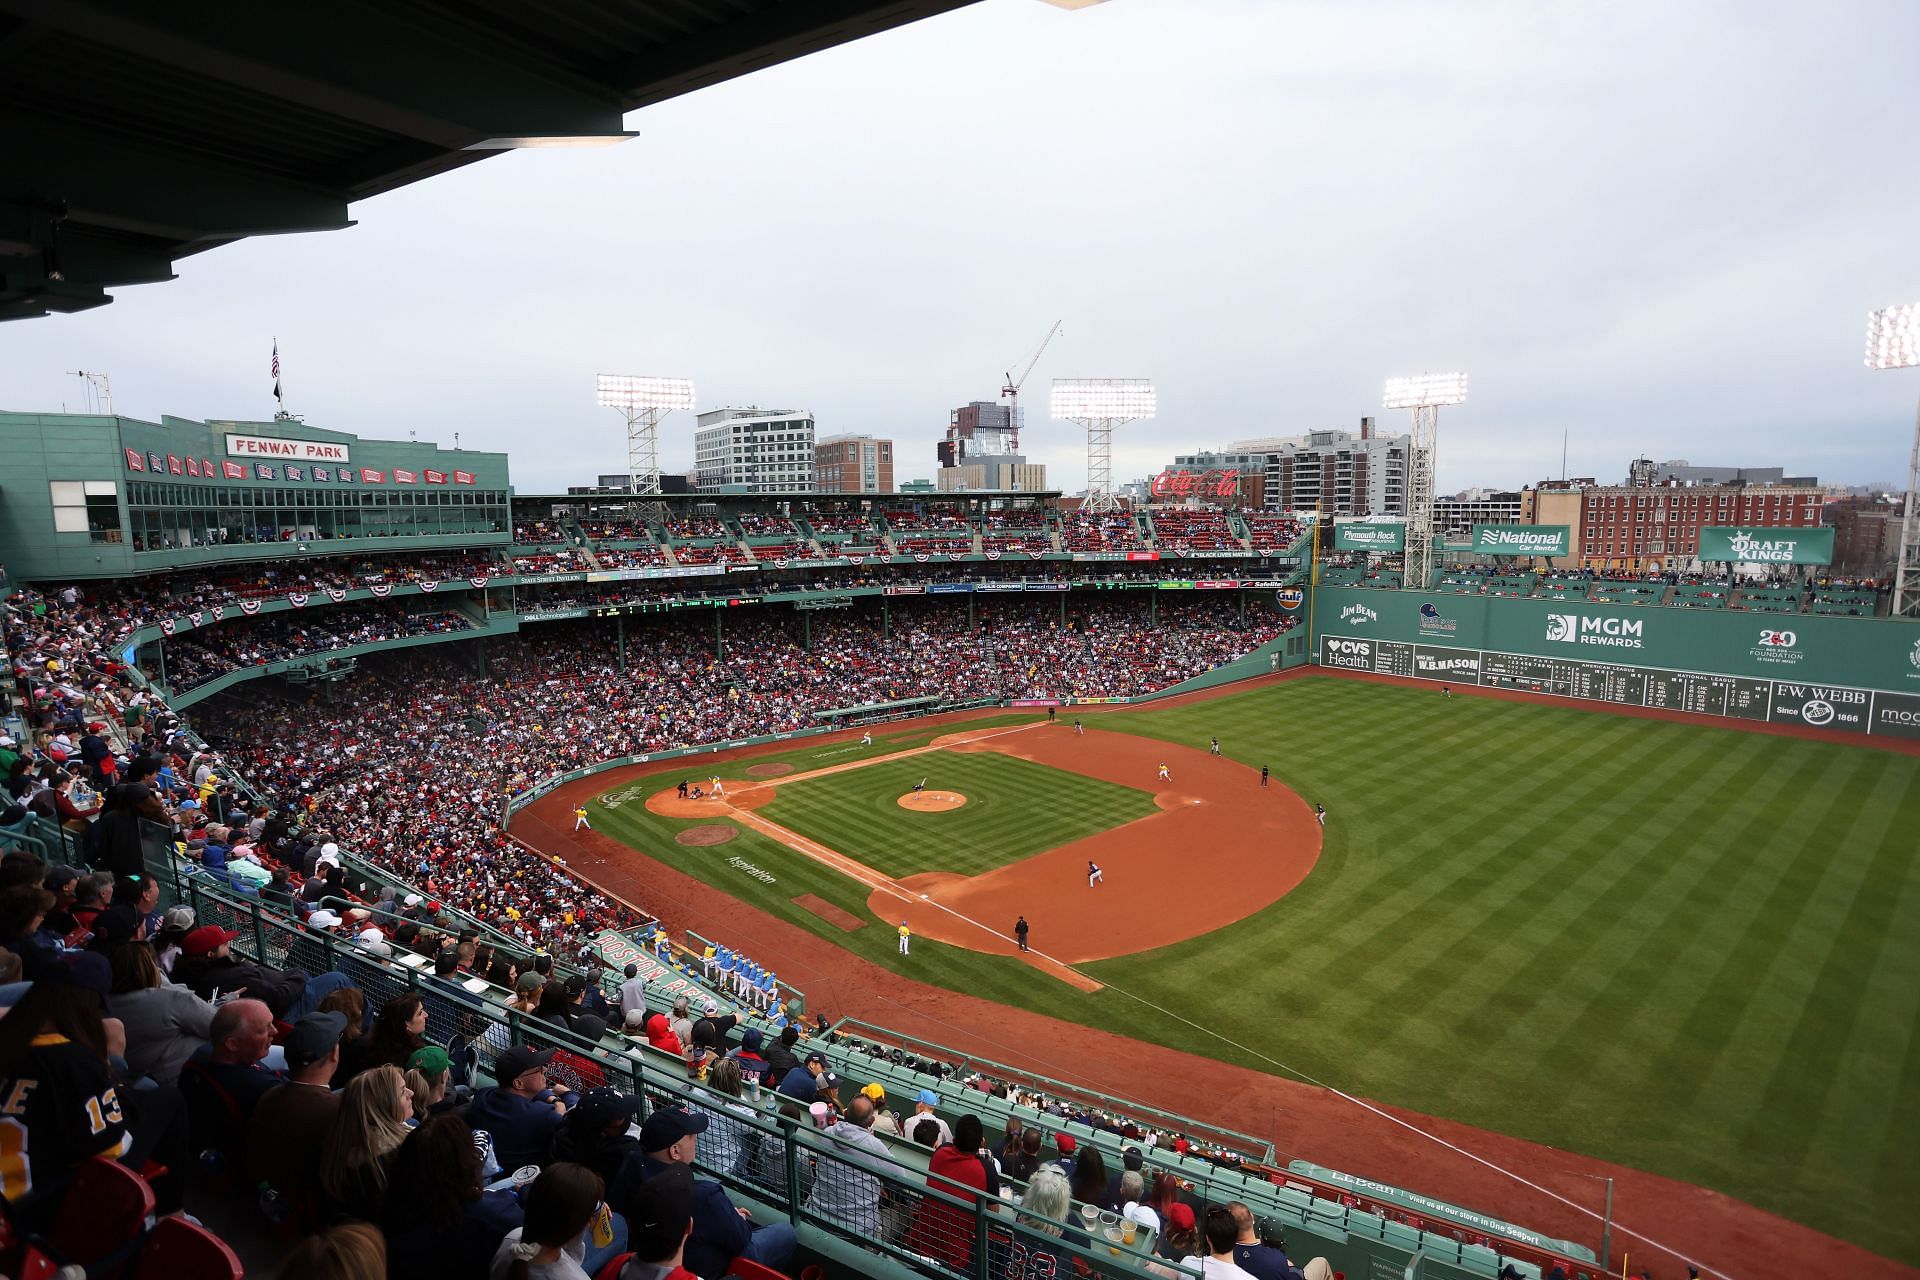 A Beautiful view of the Green Monster at Fenway